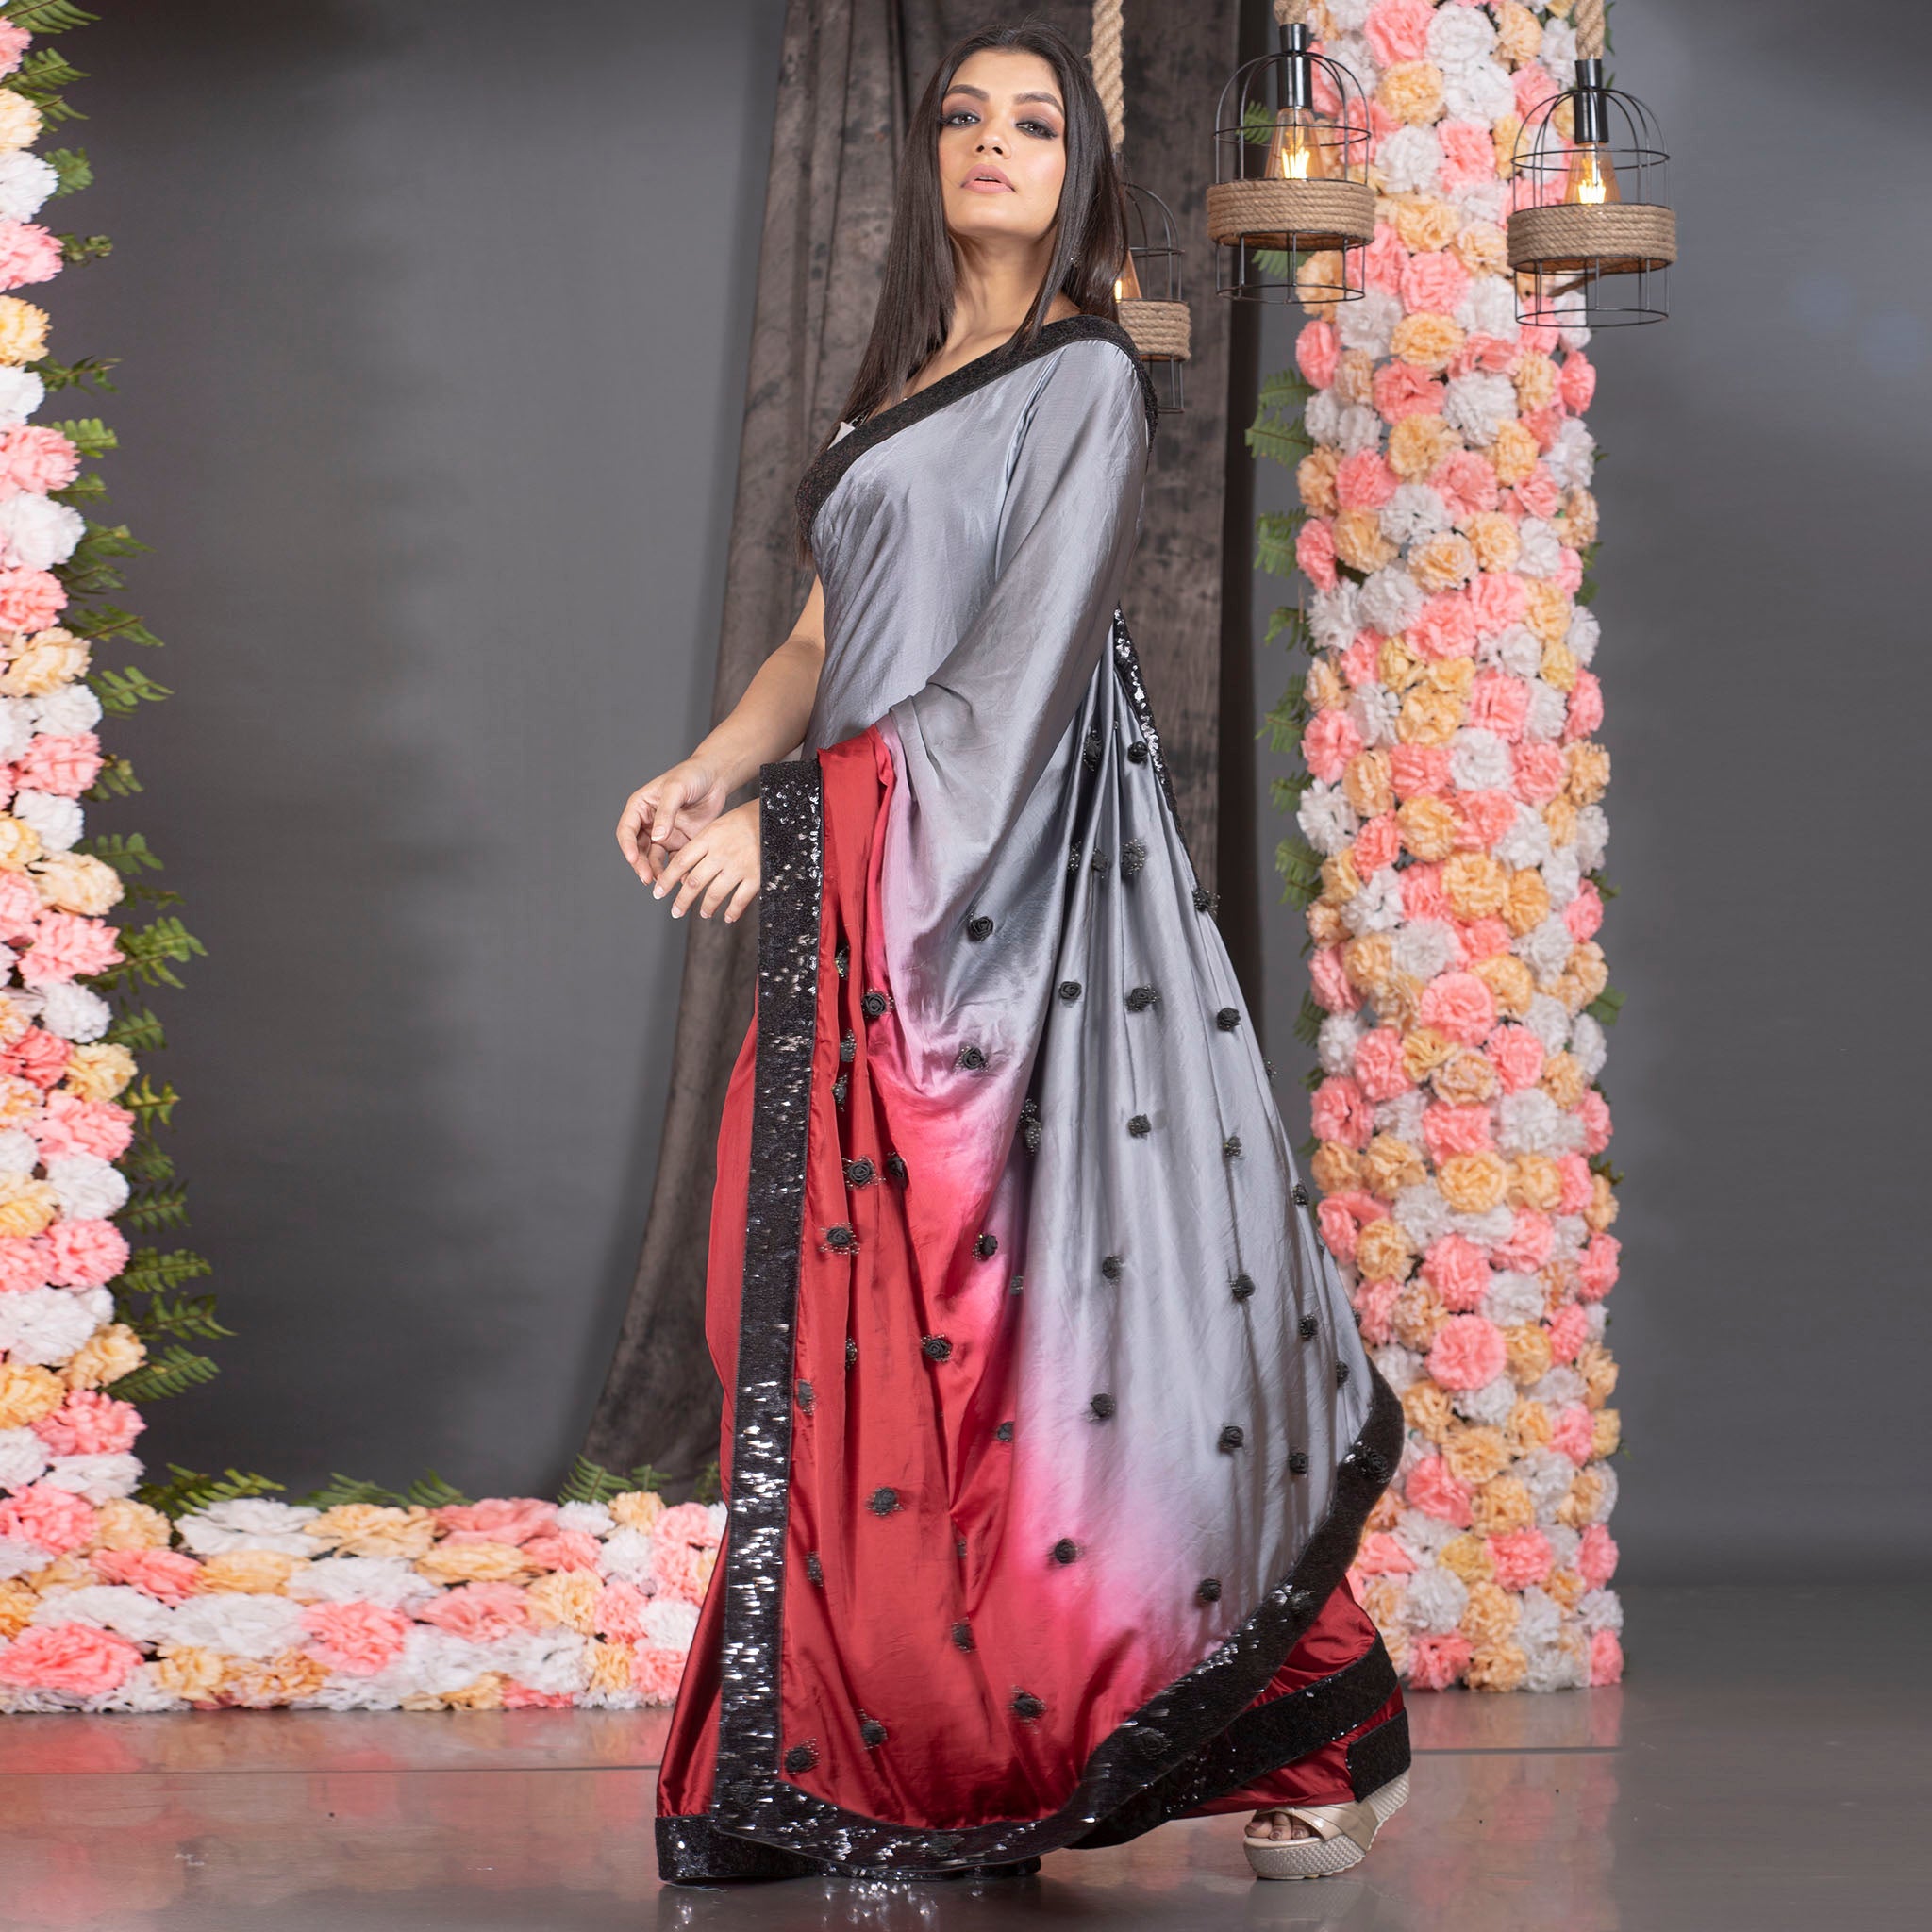 Women's Grey And Red Ombre Satin Saree With Sequin Lace Border And Handmade Rosette Pallu - Boveee